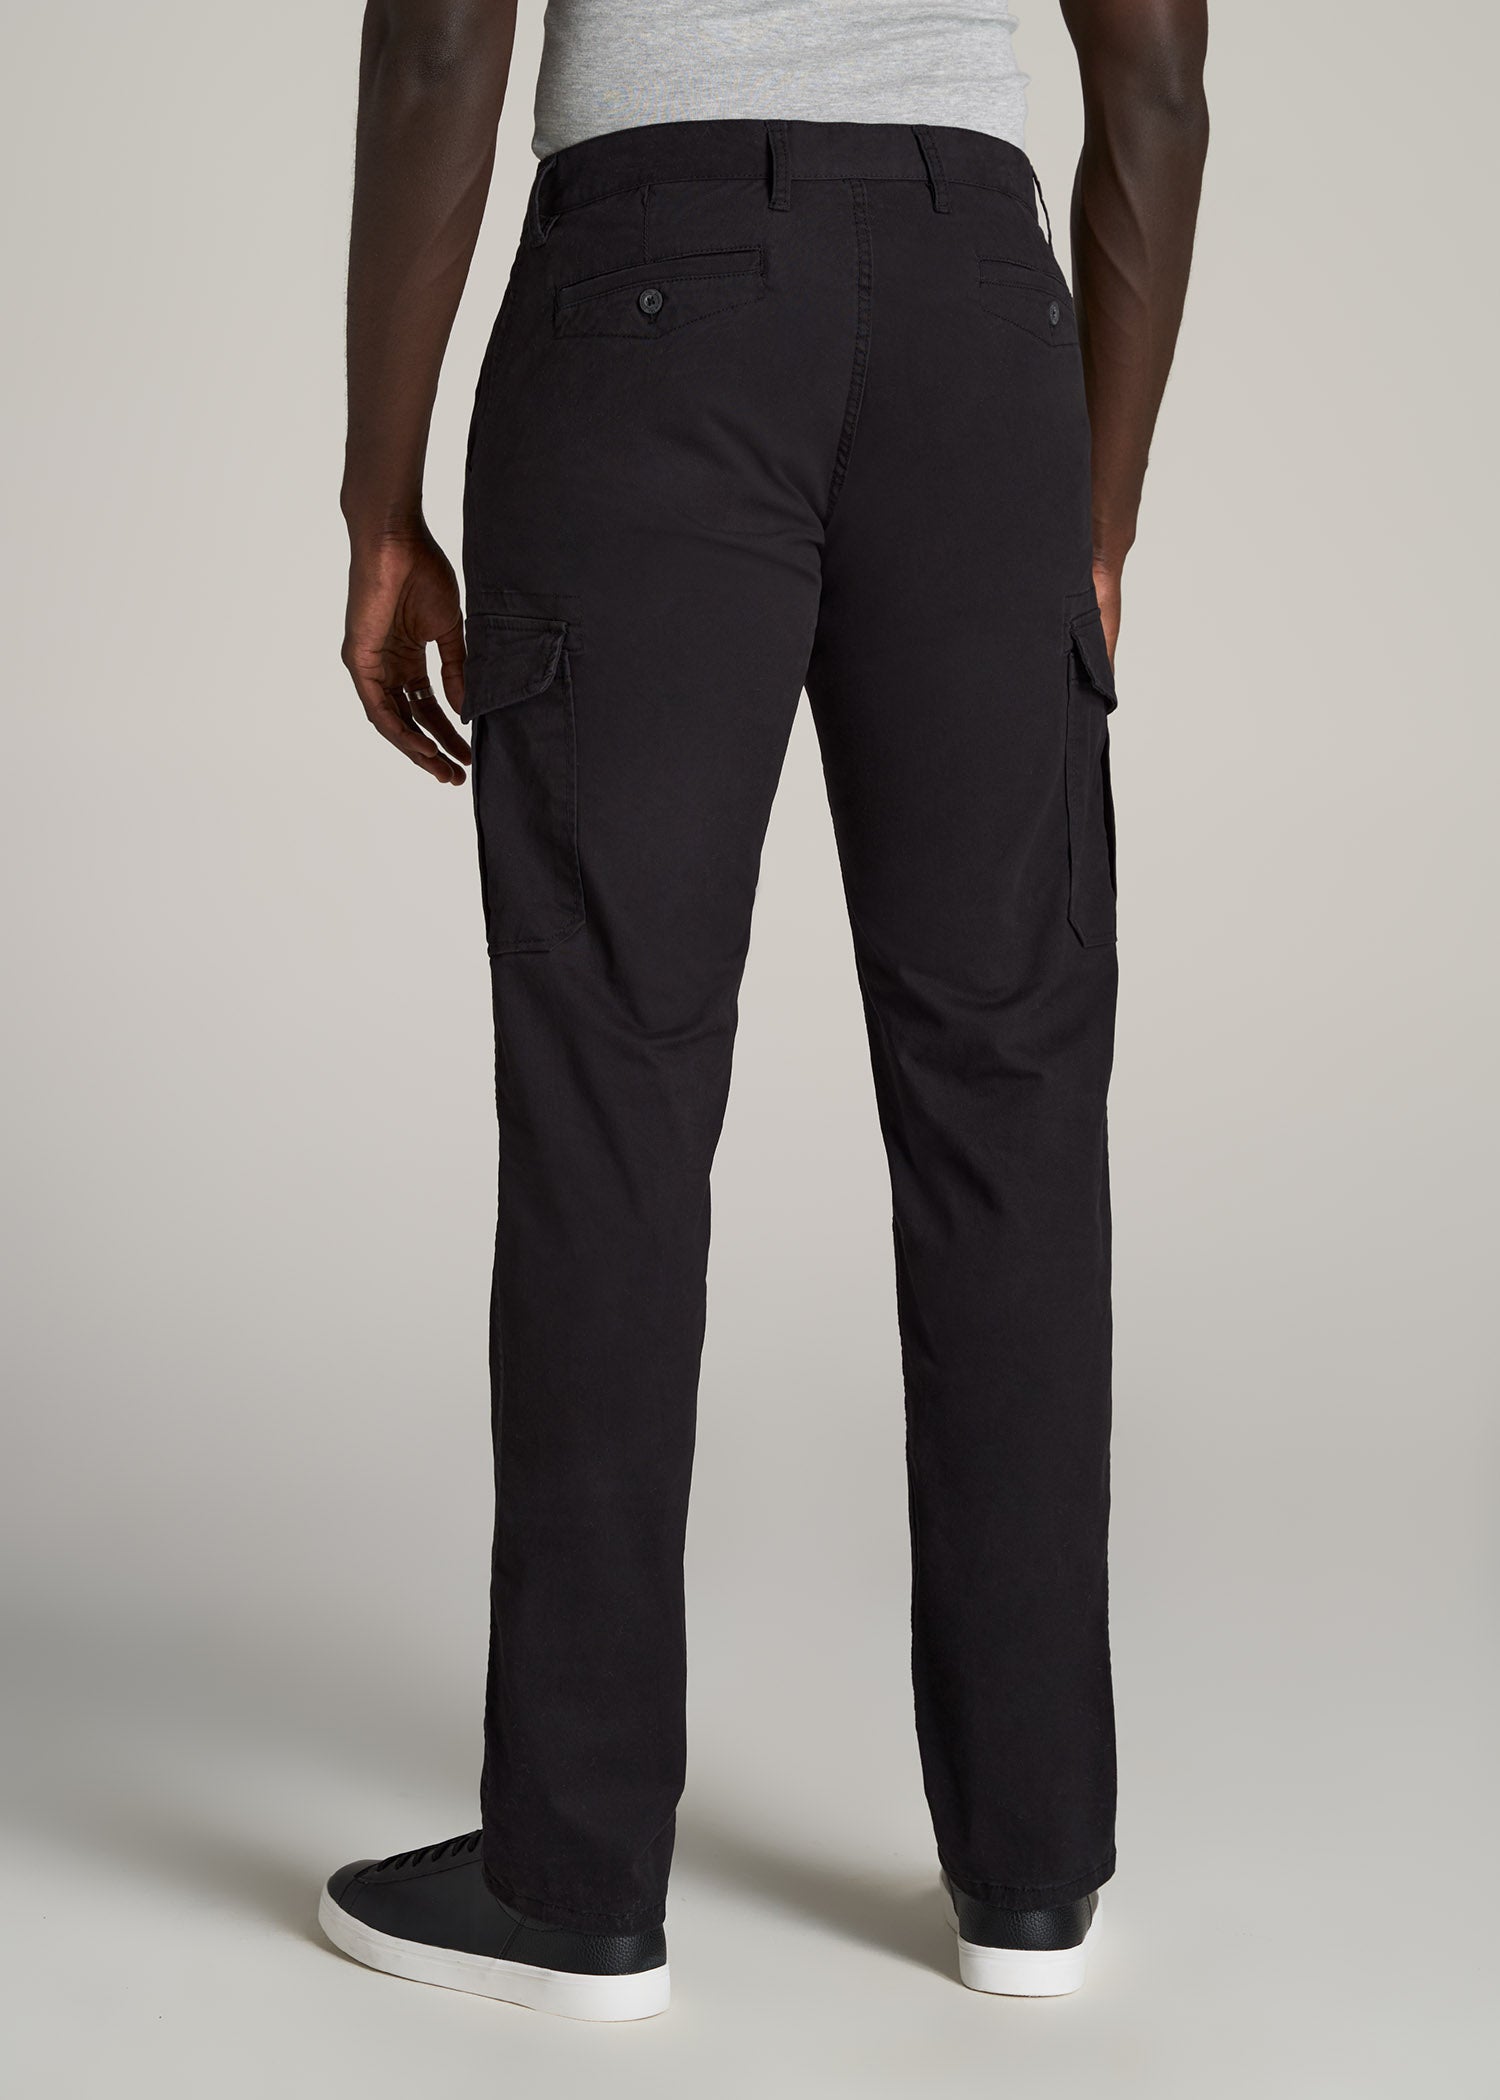 Cargos for Tall Men: Stretch Twill Cargo Black Pants | American Tall